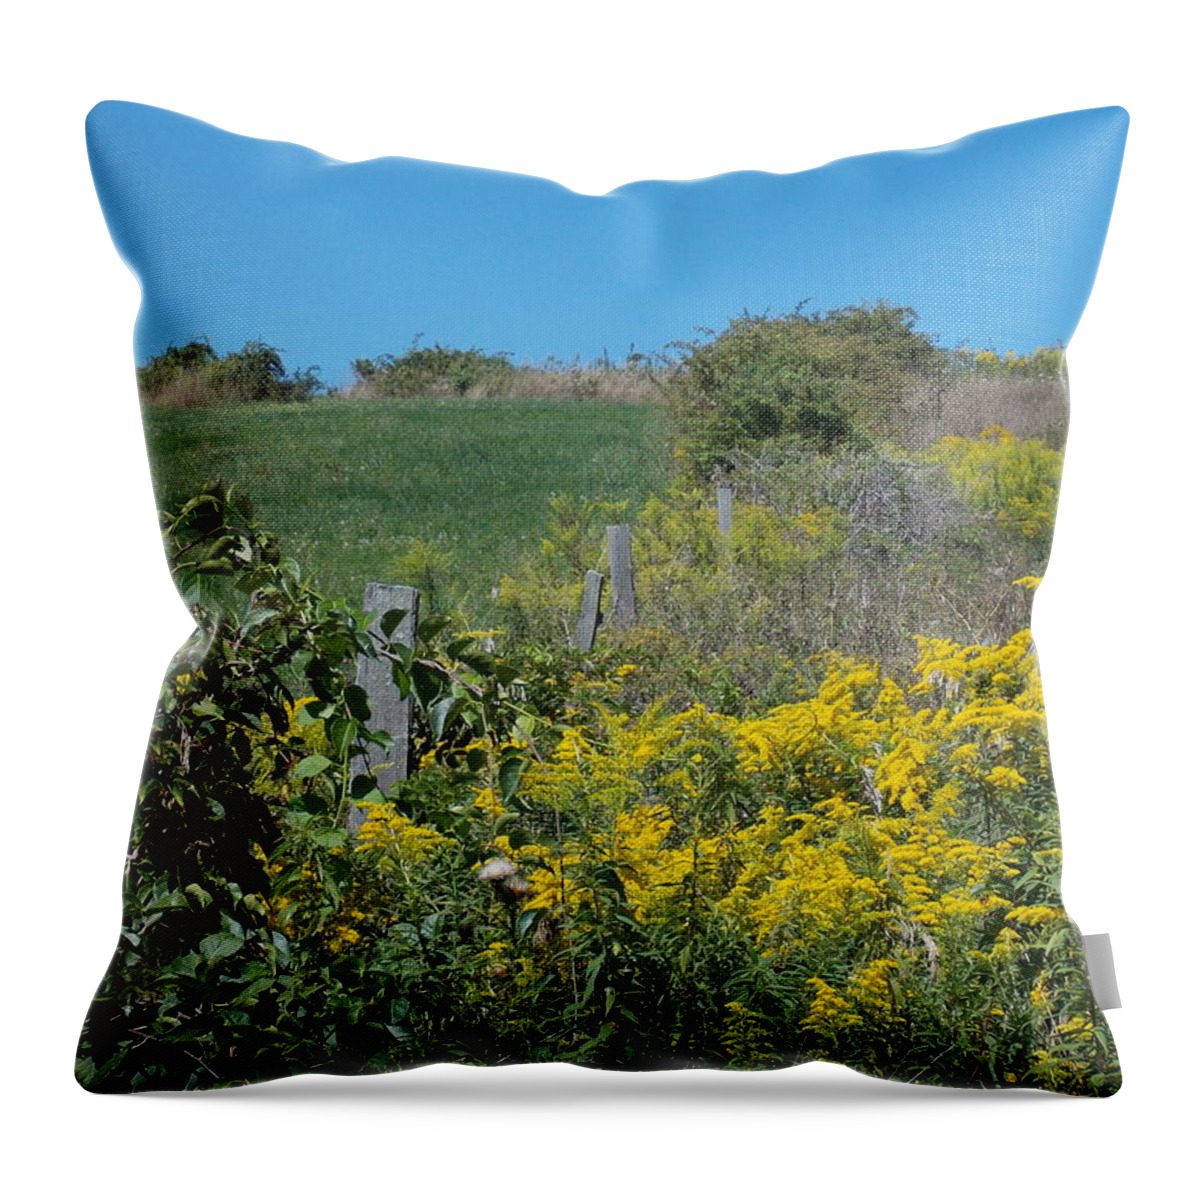 Abandoned Throw Pillow featuring the photograph Abandoned Fields 2 by Nina Kindred